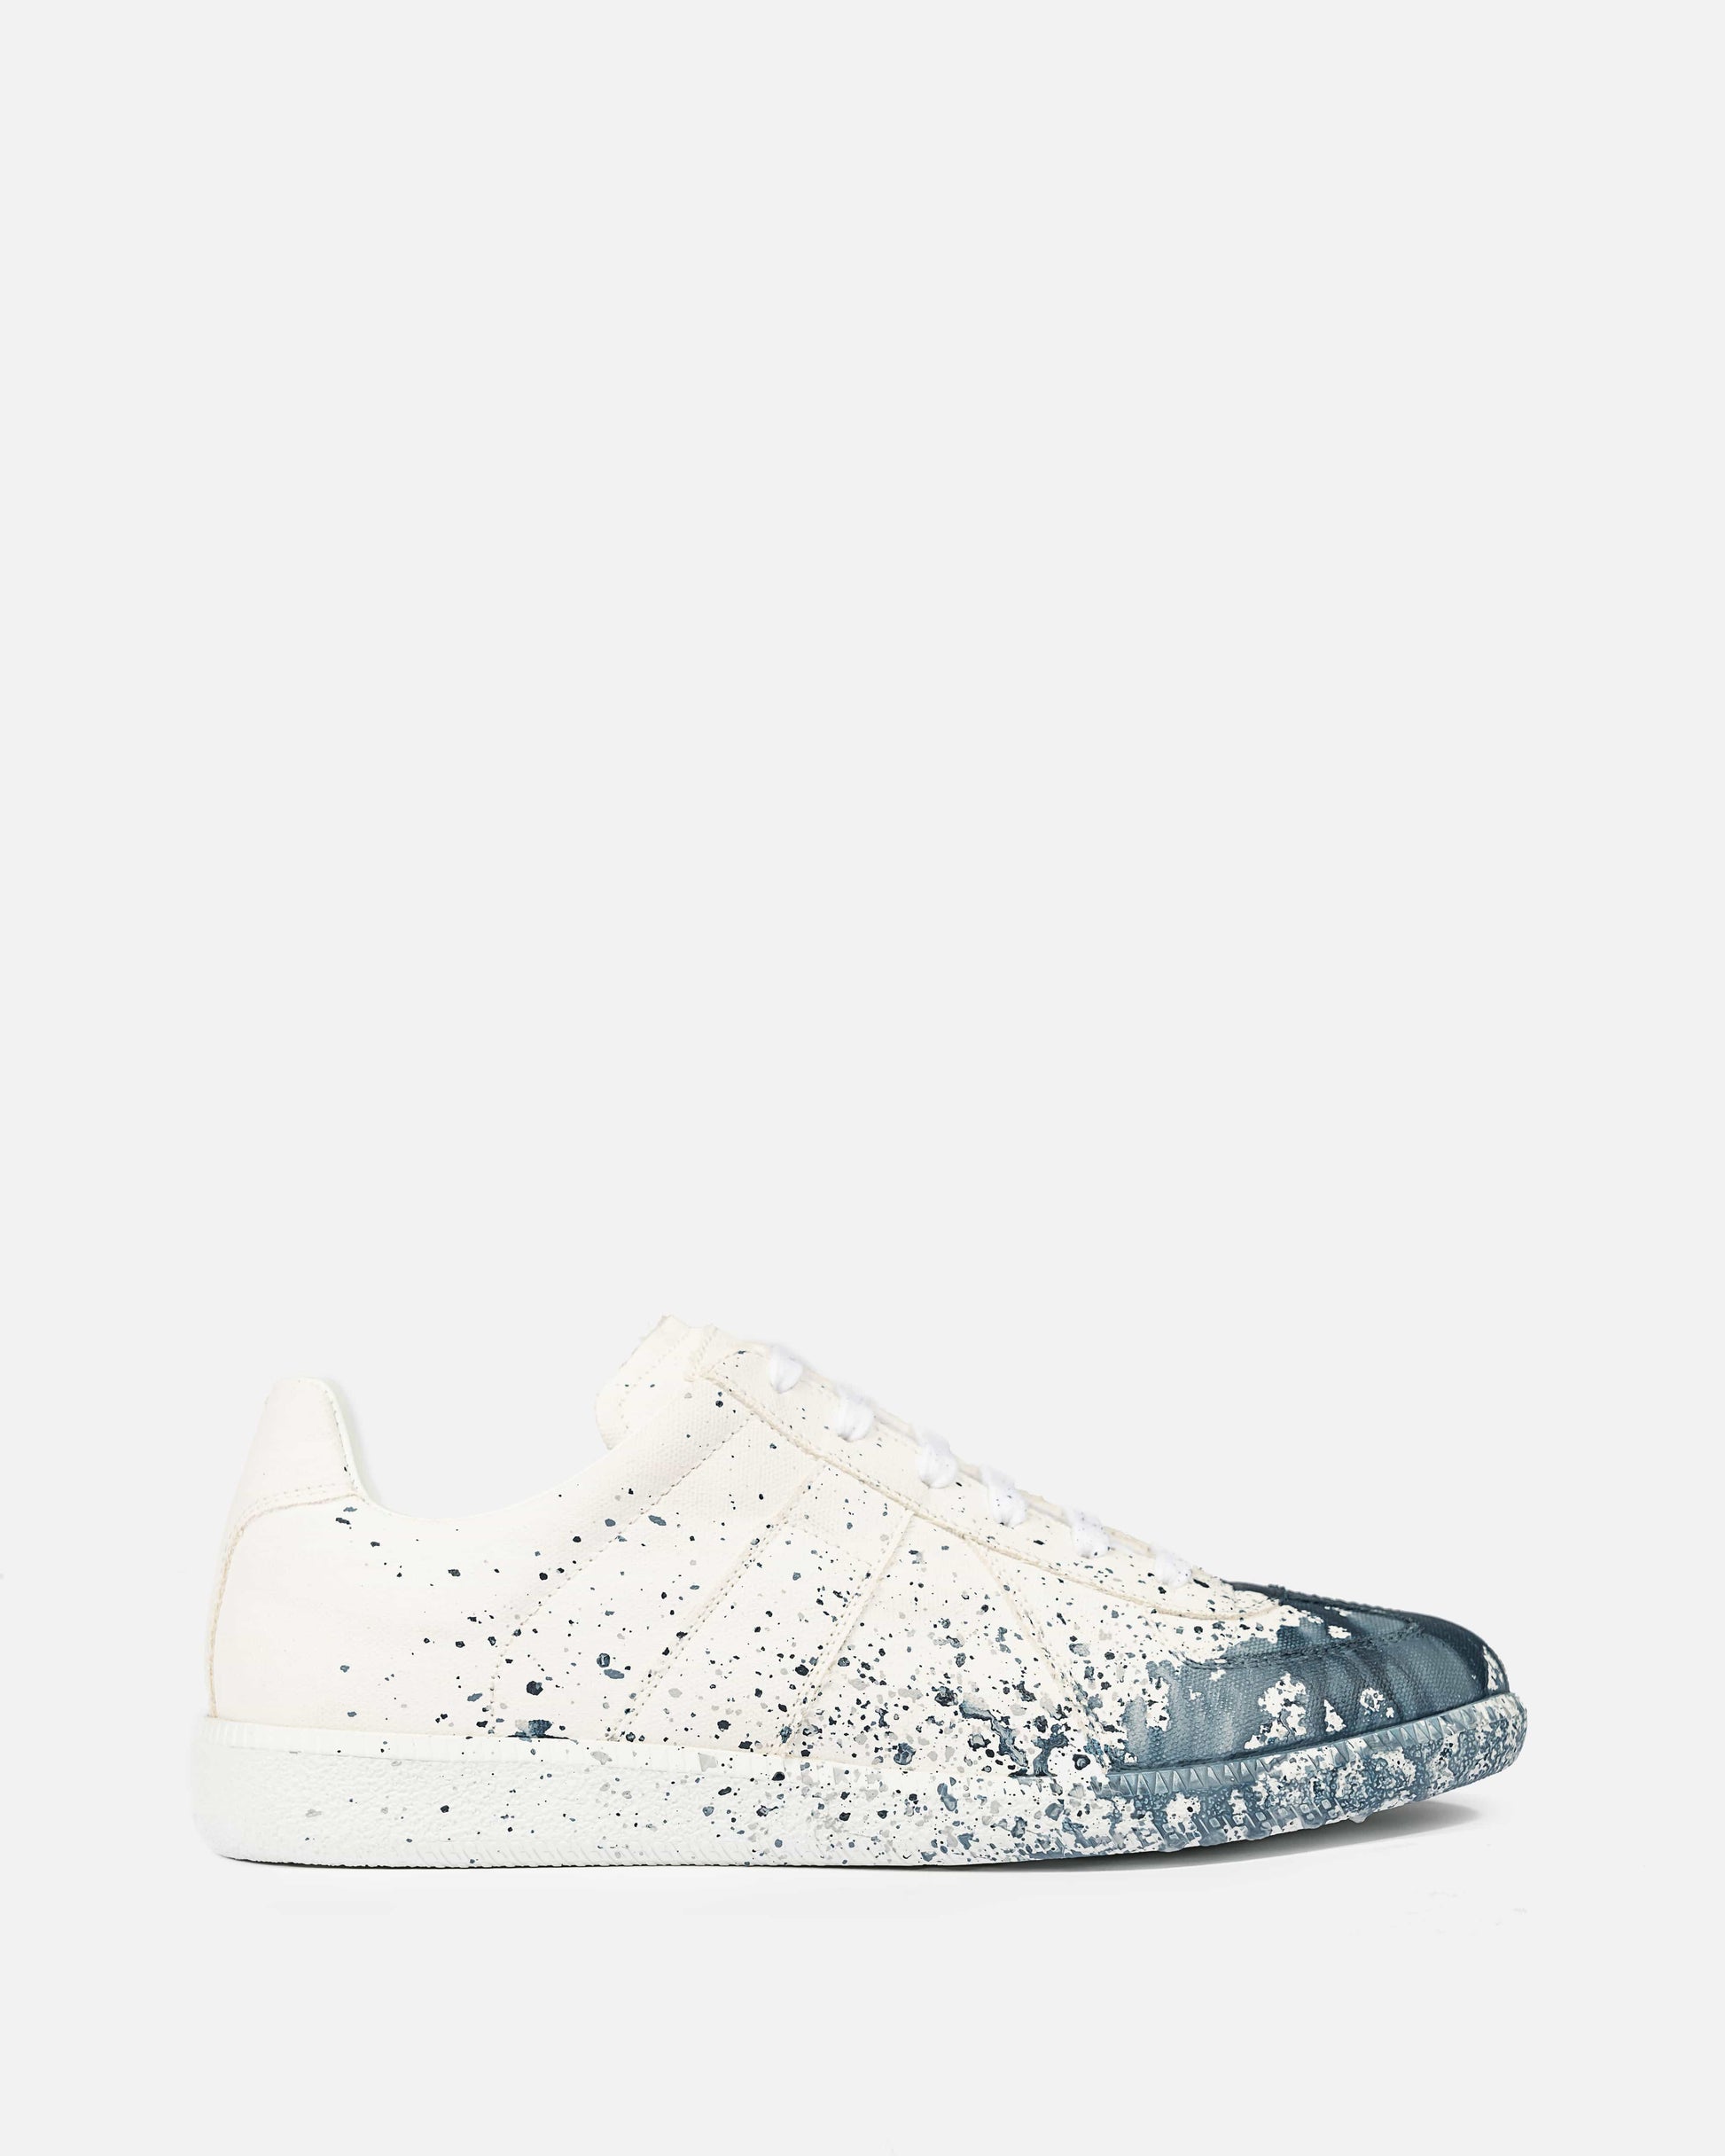 Maison Margiela Men's Sneakers Replica Stained Effect Sneakers in White/Blue